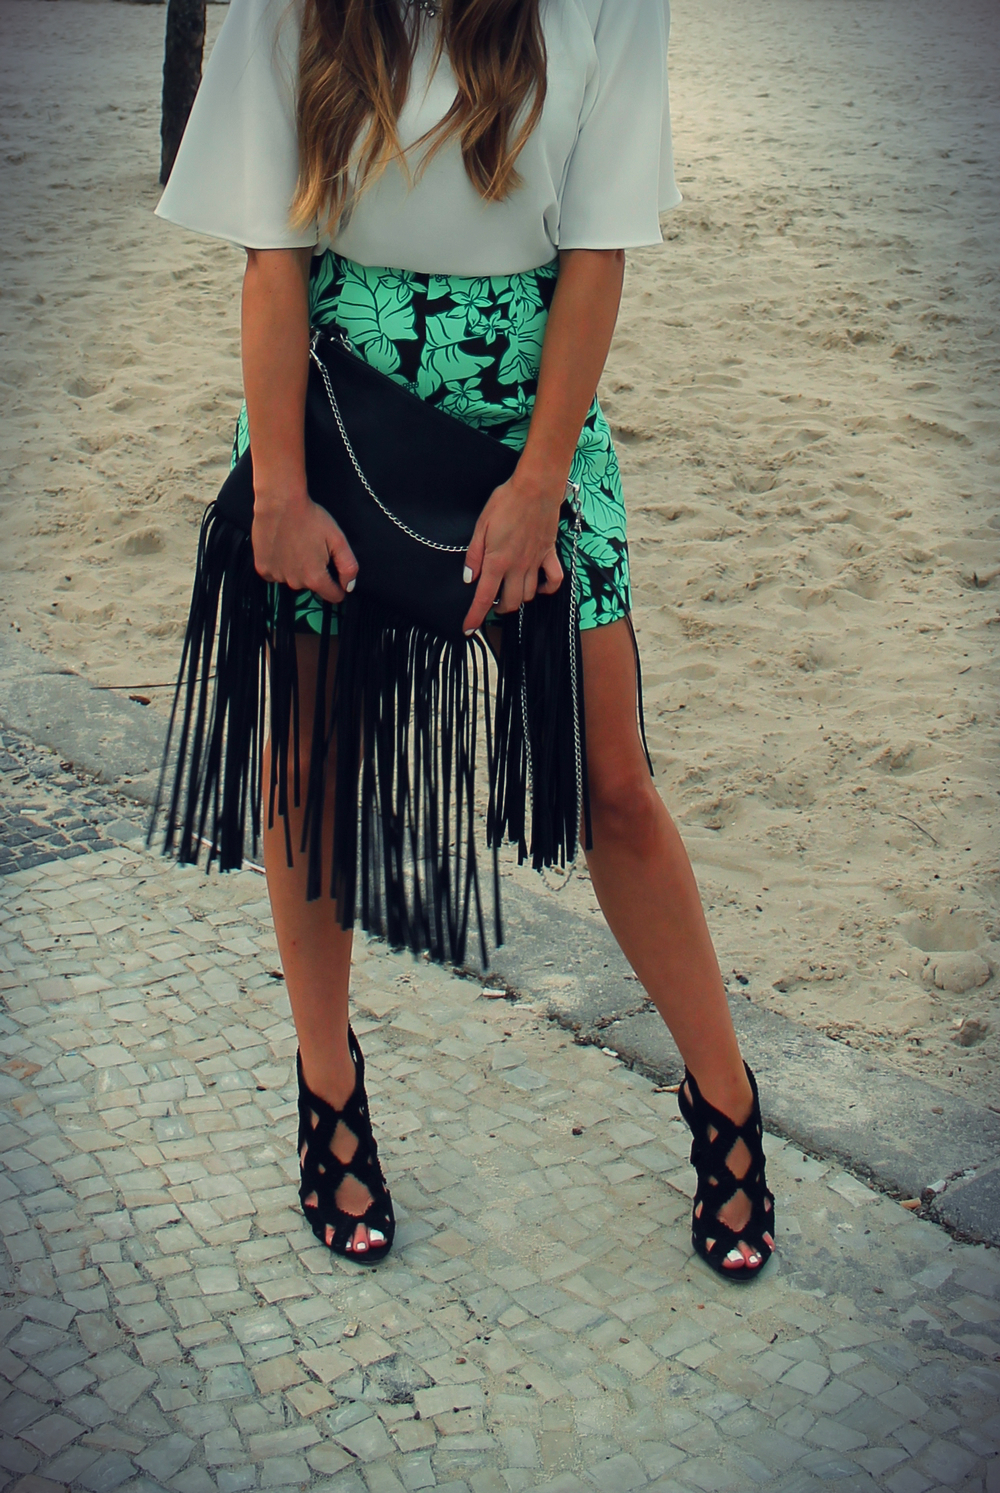 clutch bag with fringes h&m and high heels zara